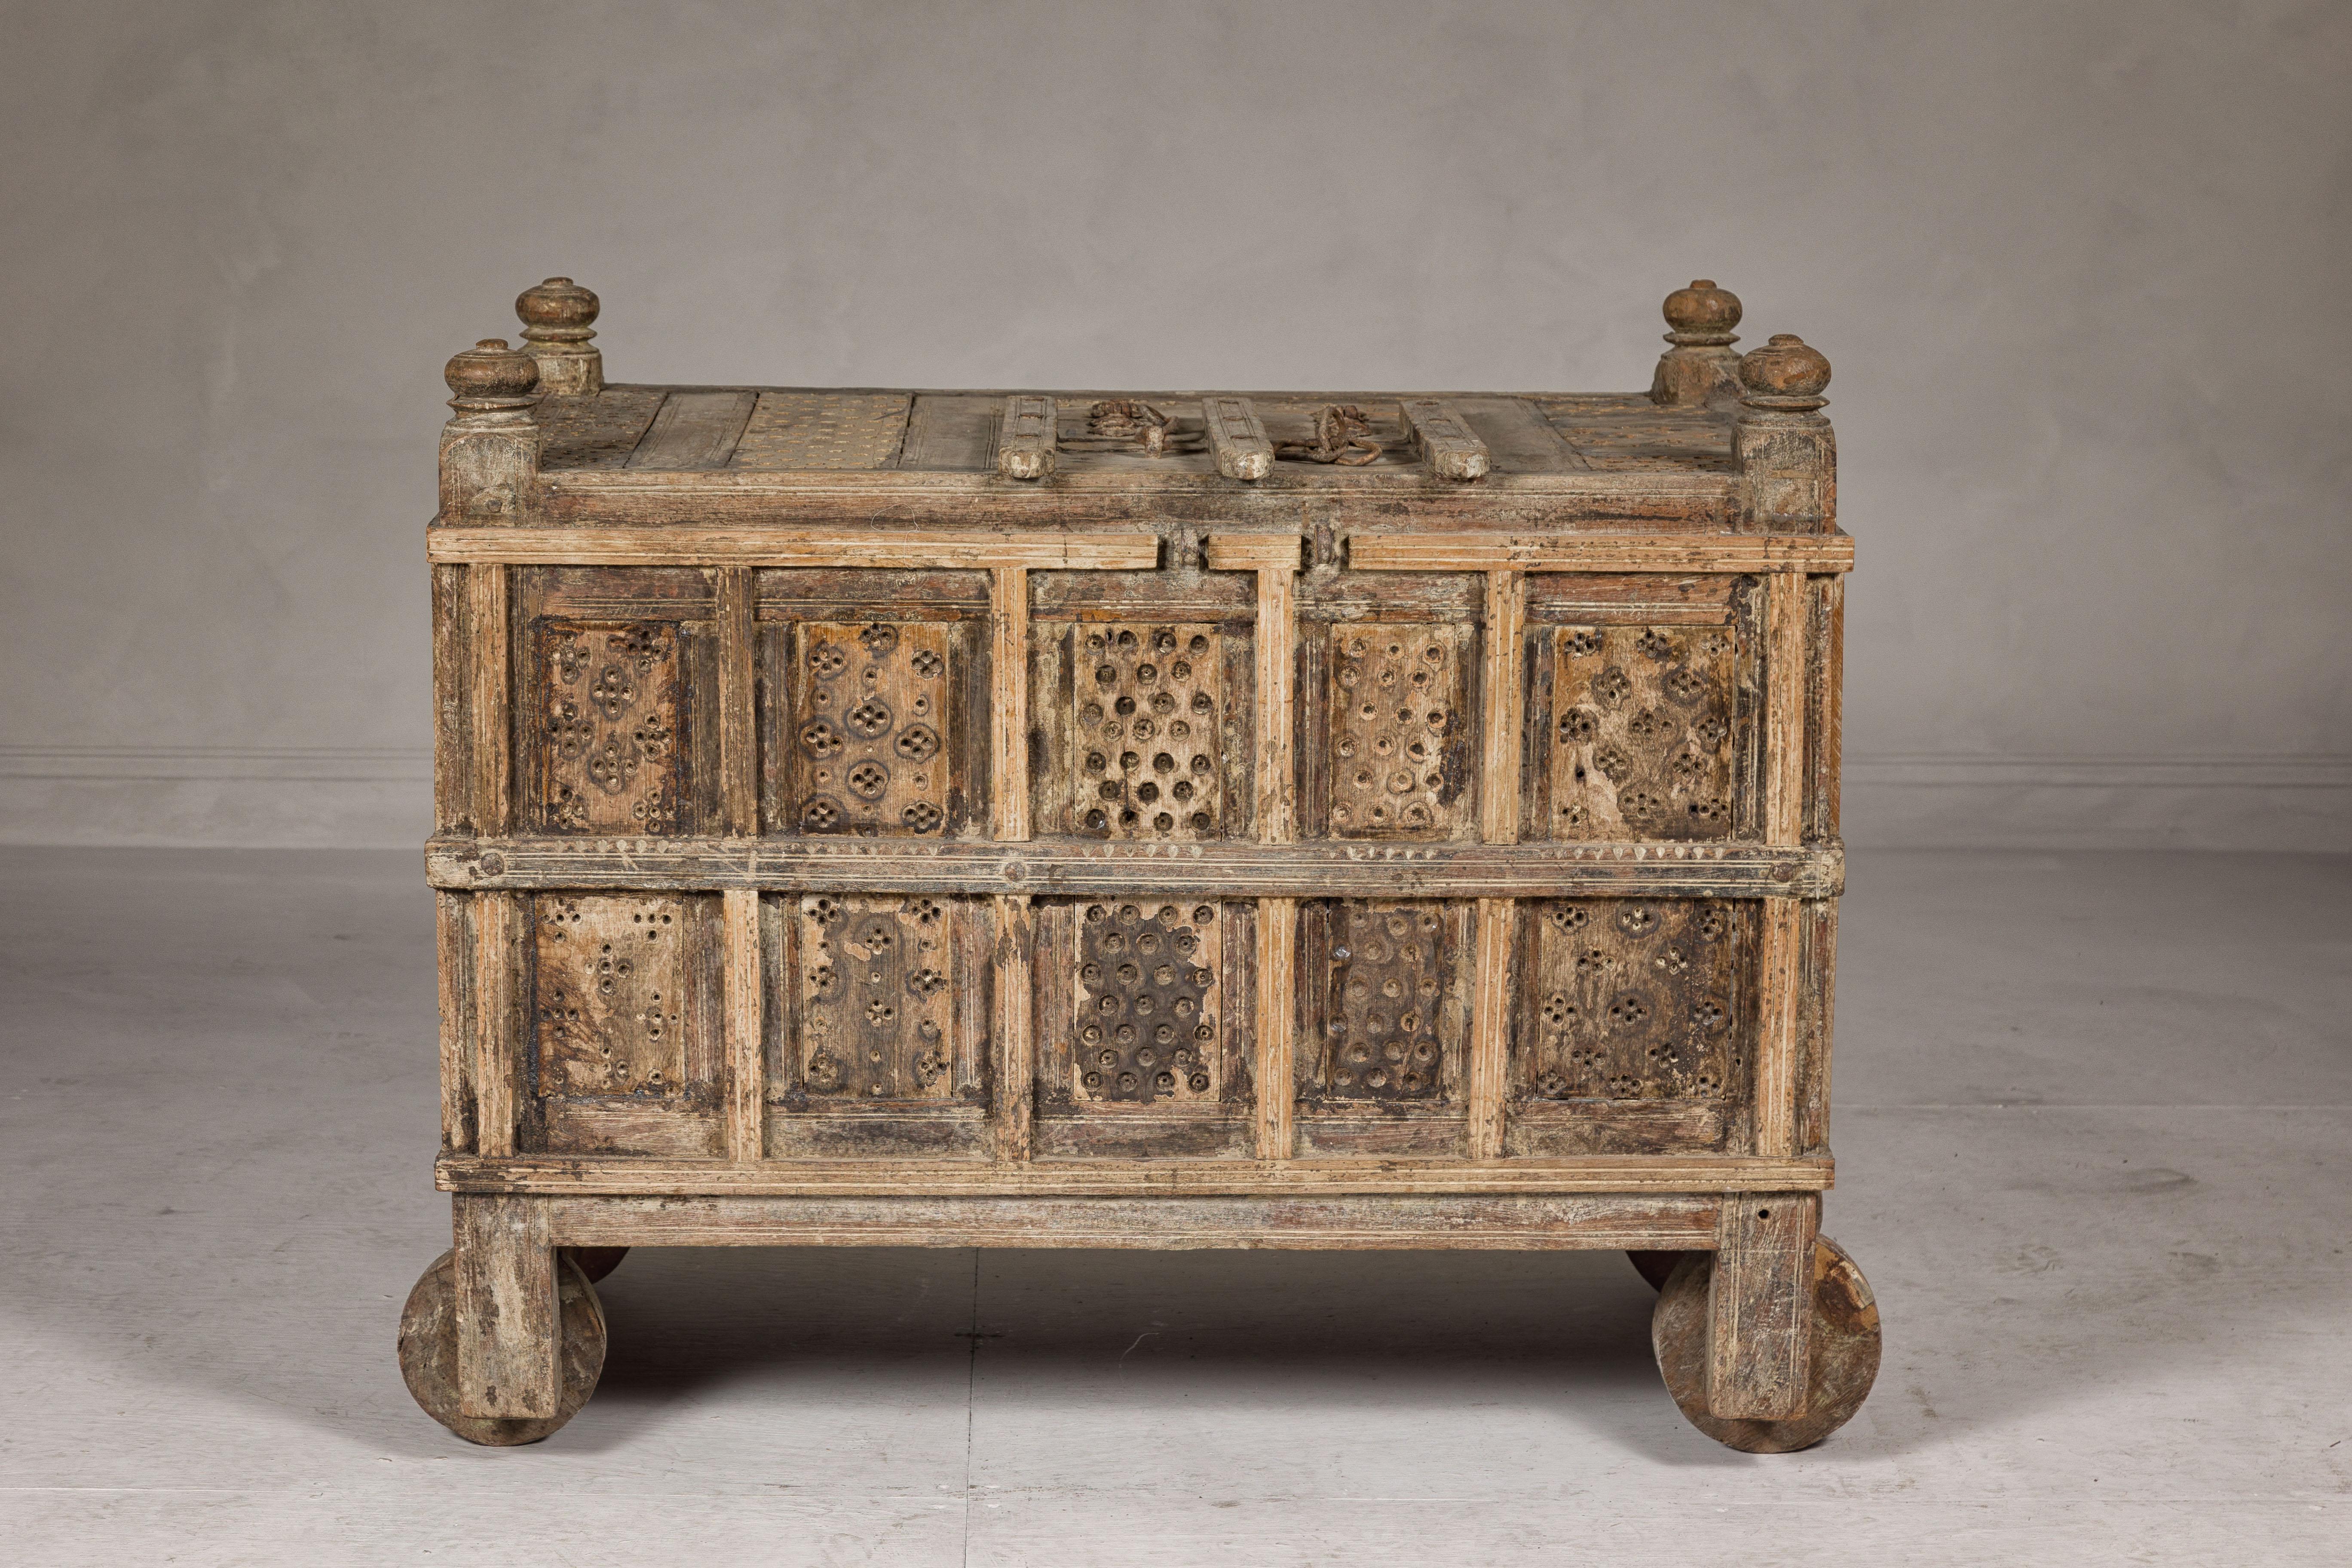 An antique Indian Damachiya dowry cabinet on wheels with carved panels, turned finials and petite door on the top. This exquisite antique Indian Damachiya dowry cabinet, mounted on wheels for easy movement, is a testament to traditional